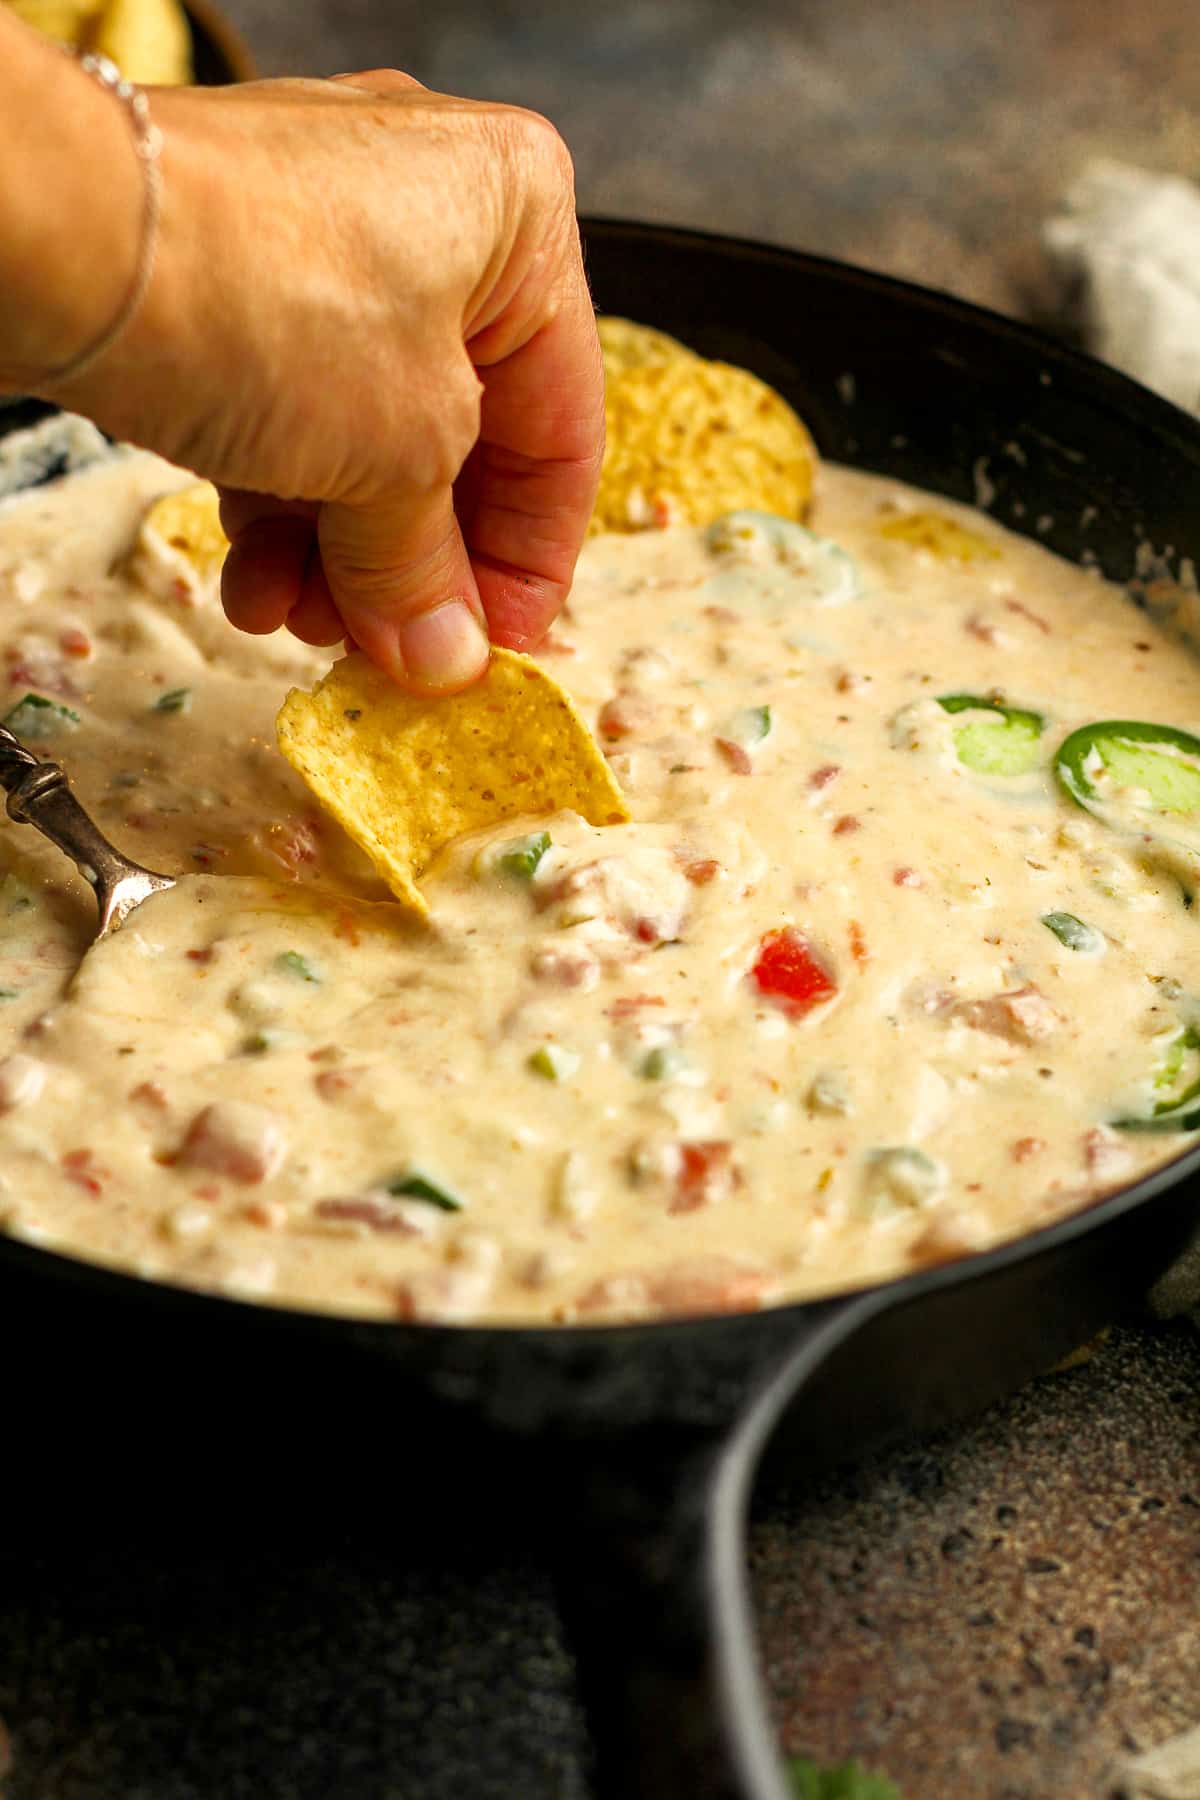 A hand dipping a chip into a pan of pepper jack queso.